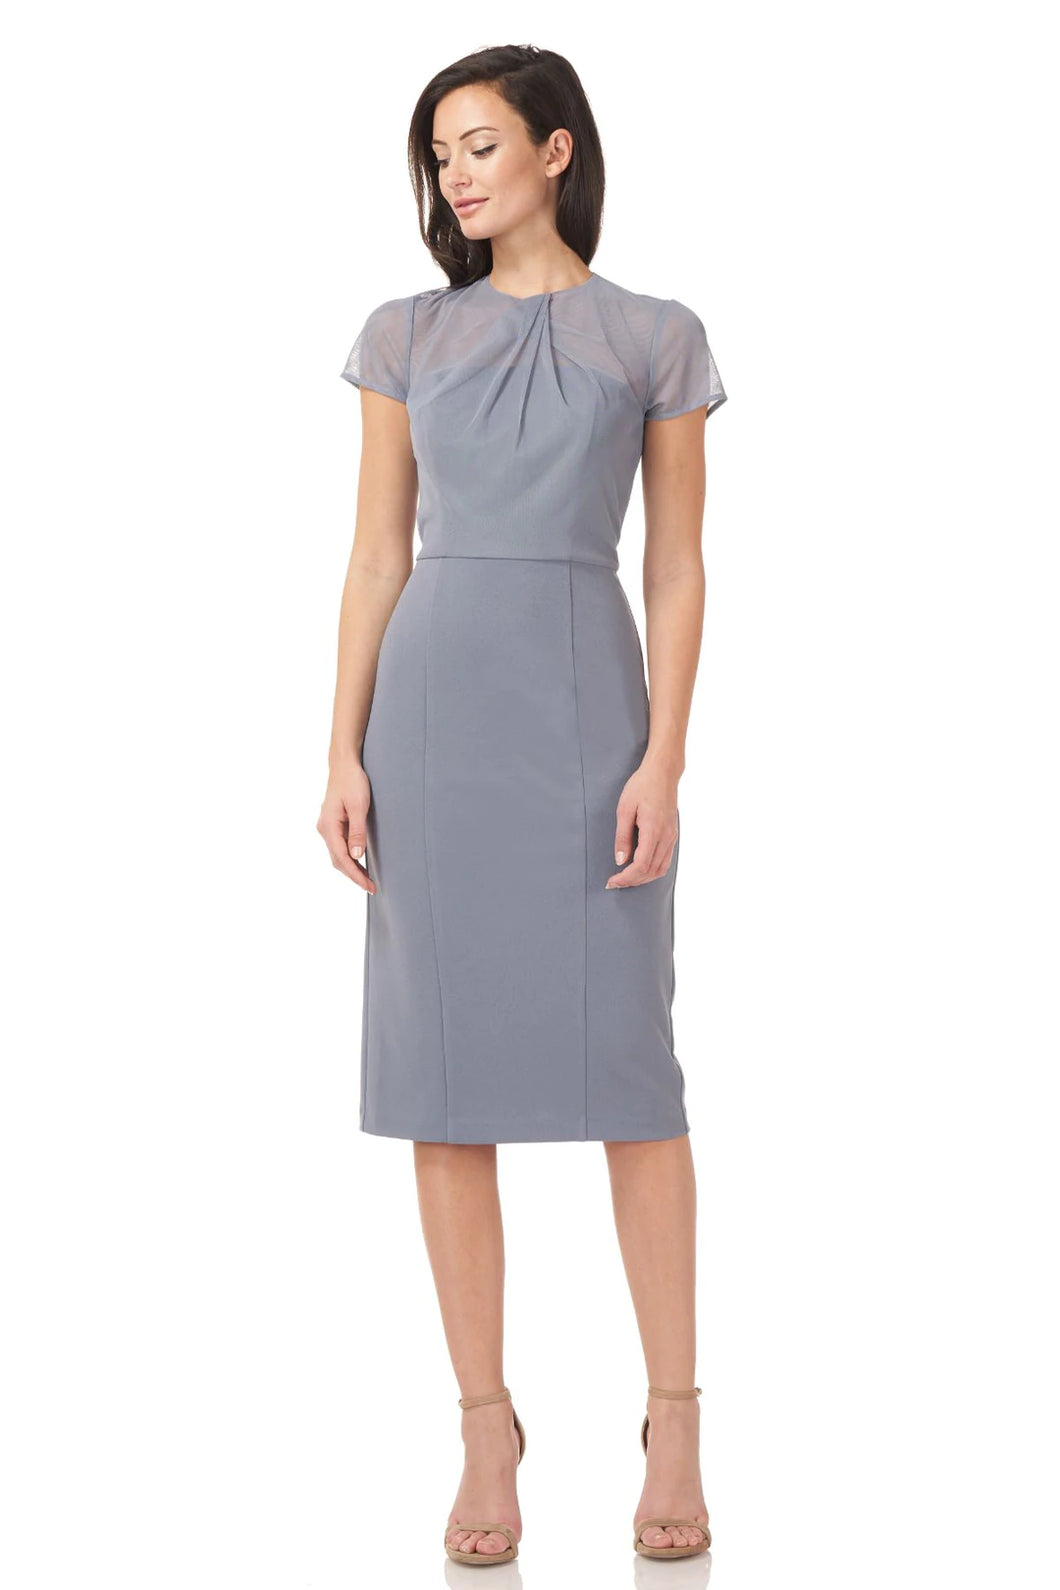 JS Collections Slate Blue Short Sleeve Illusion Cocktail Dress